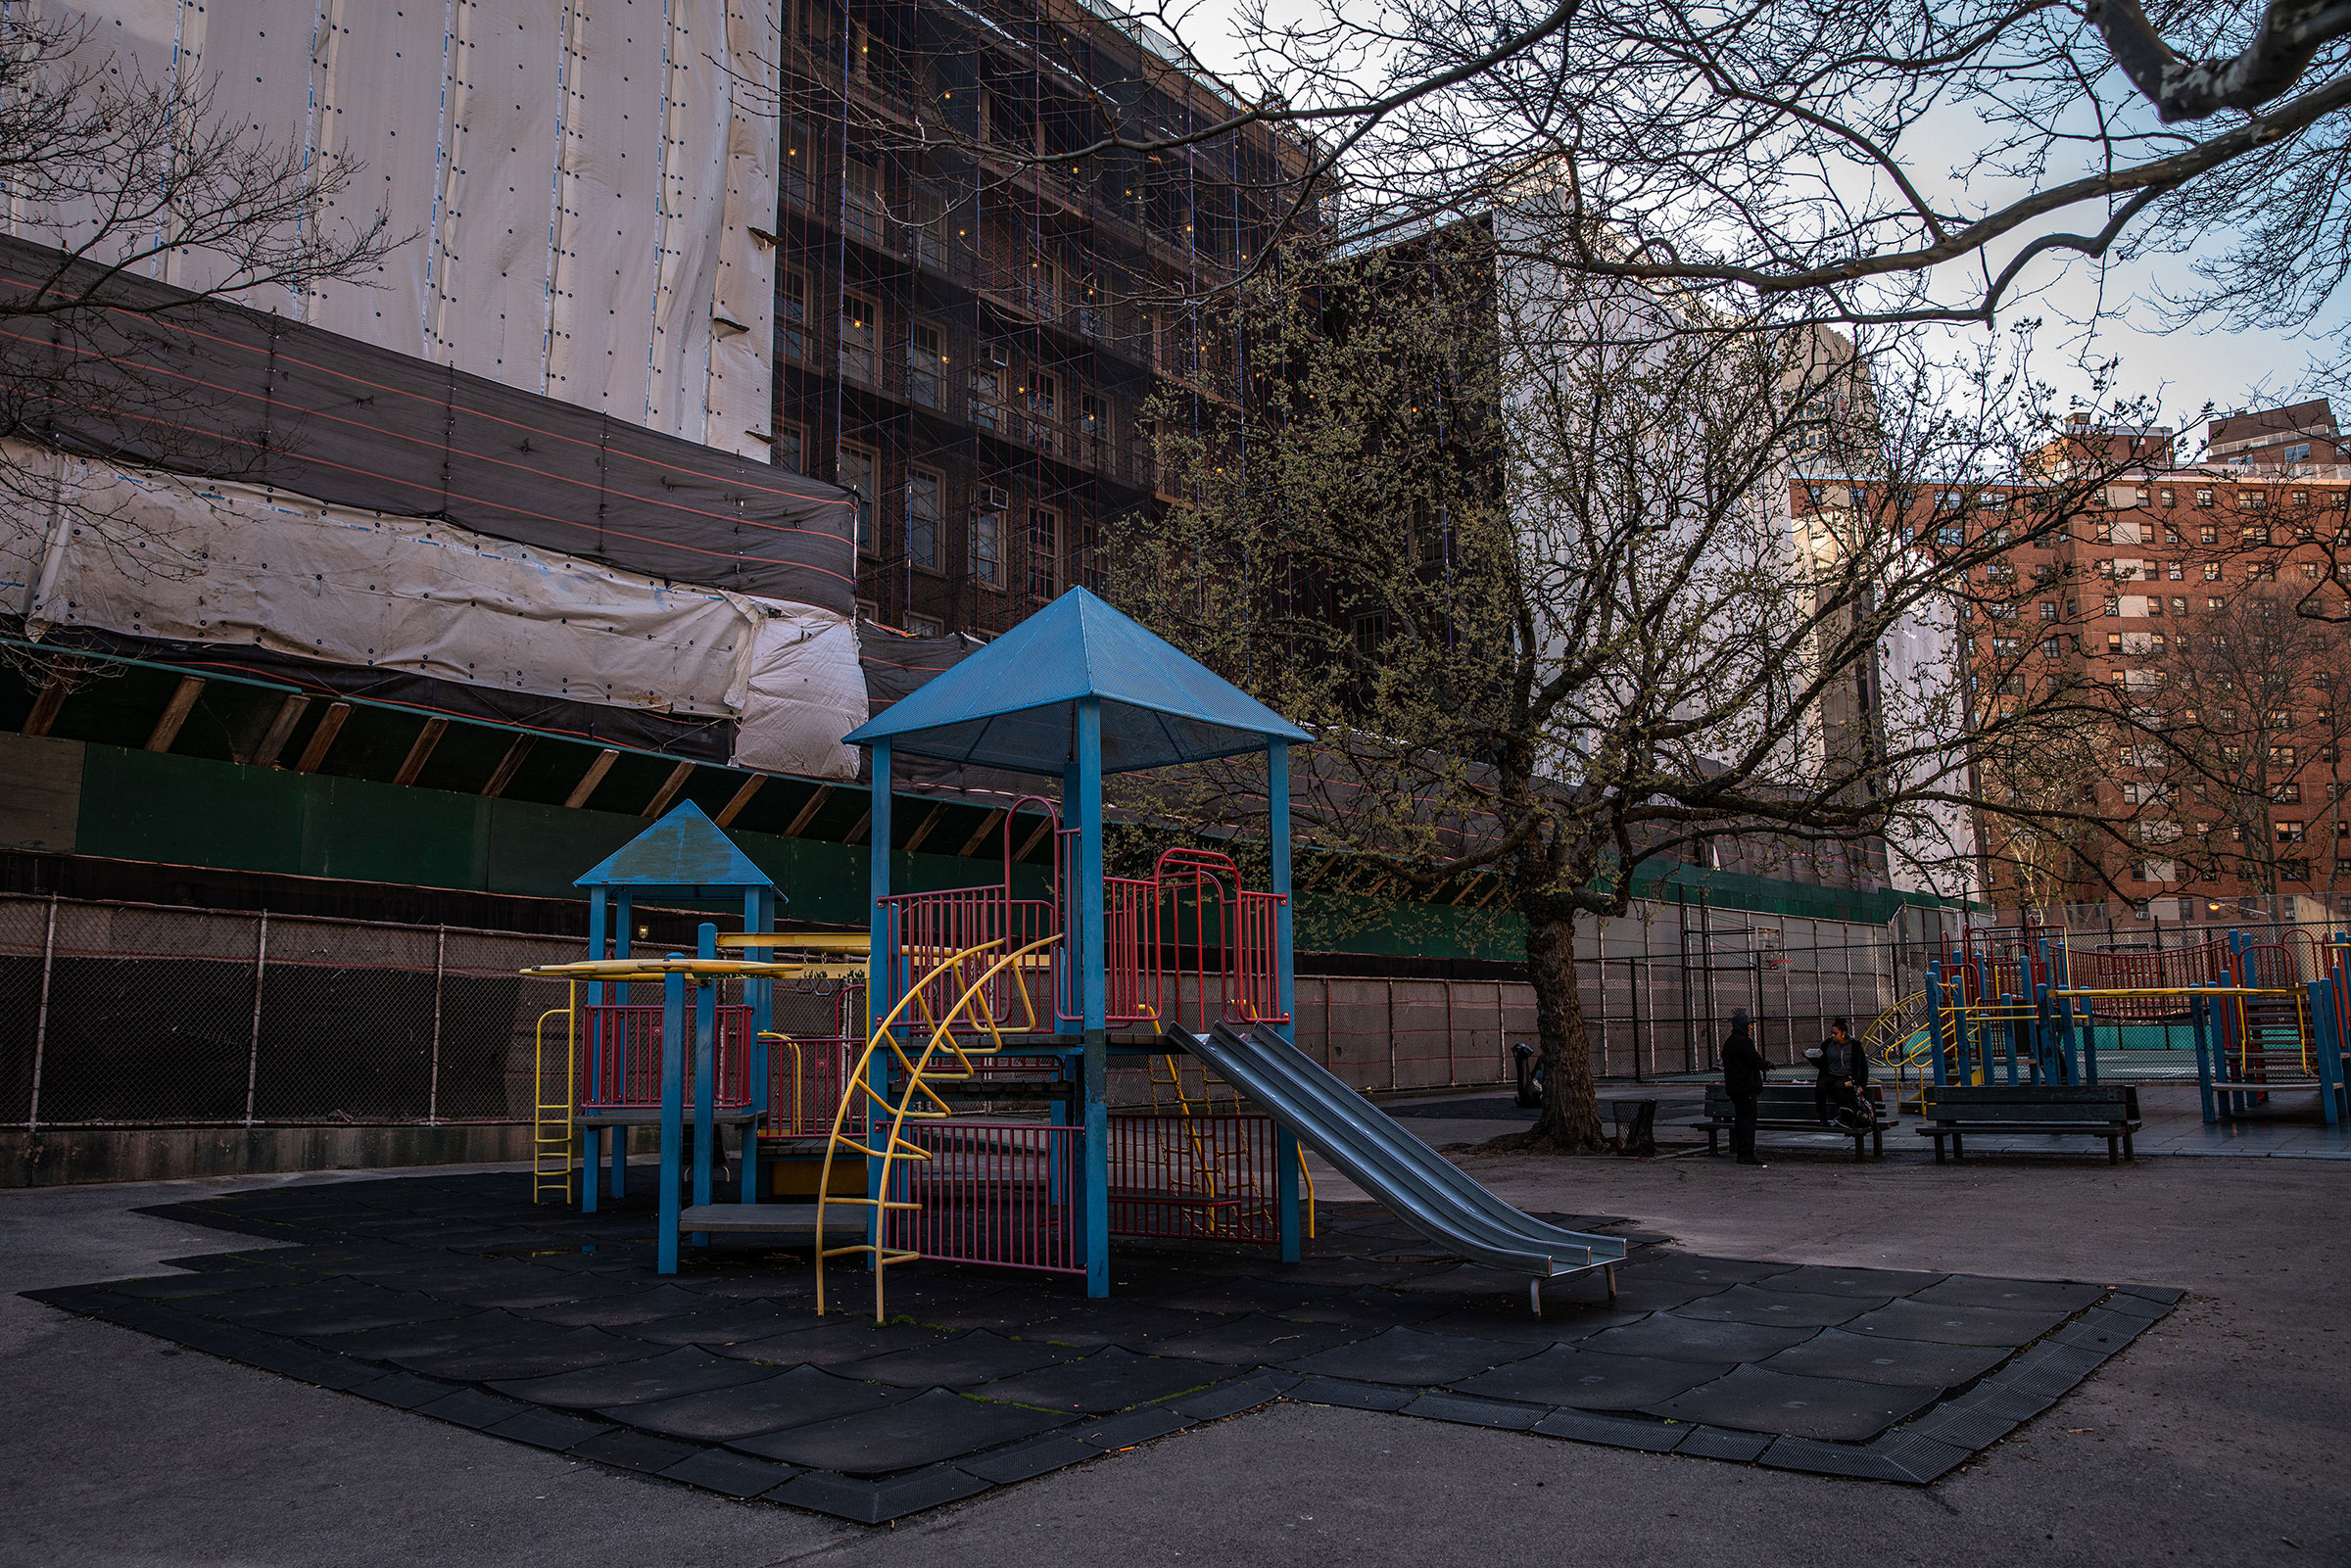 The Harlem Renaissance Training Center's playground remains empty in New York on March 24, 2019. (Juan Arredondo—The New York Times/Redux)